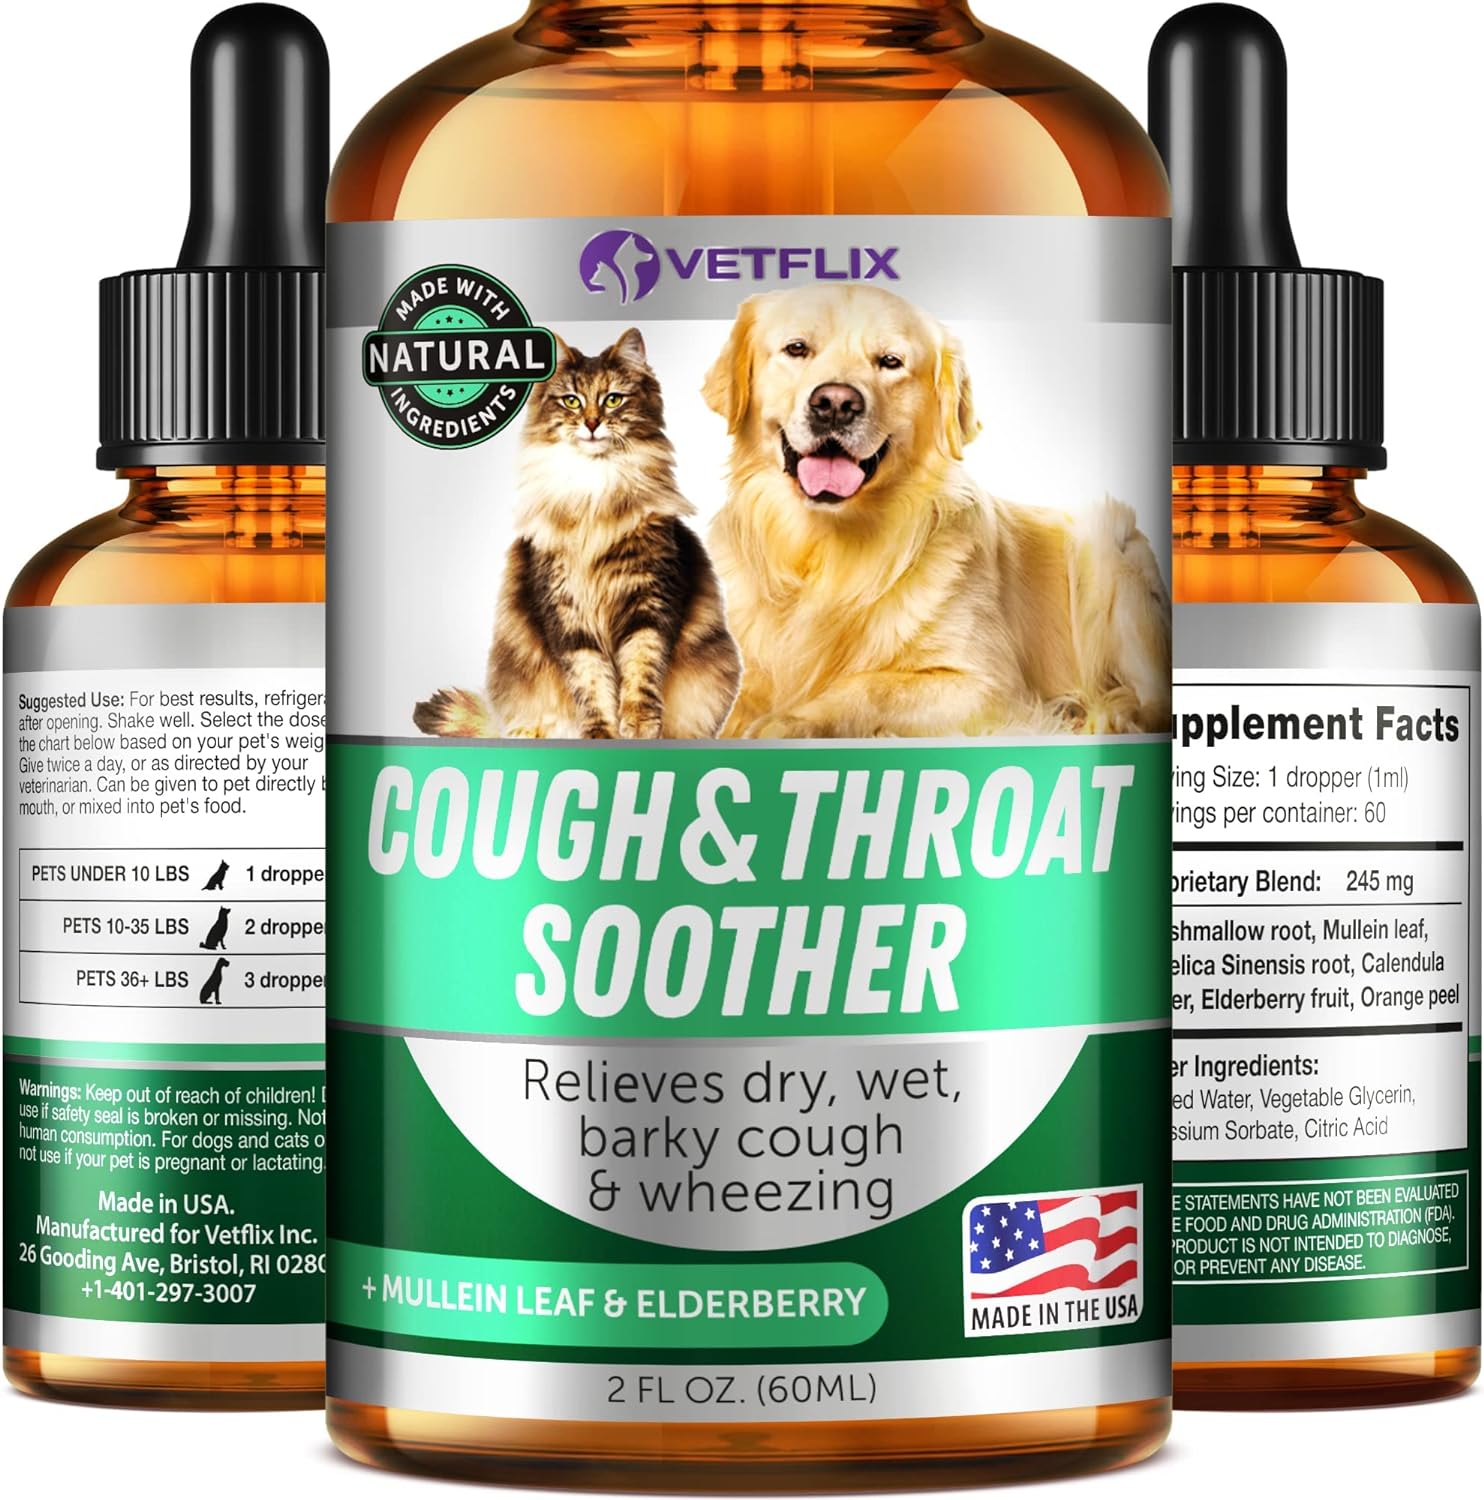 Kennel Cough, Allergy Relief & Natural Respiratory Support - Throat Soother Supplement for Dogs and Cats - Made in USA - Mullen Leaf & Elderberry Blend - Easy Add to Food - 2 Fl.Oz